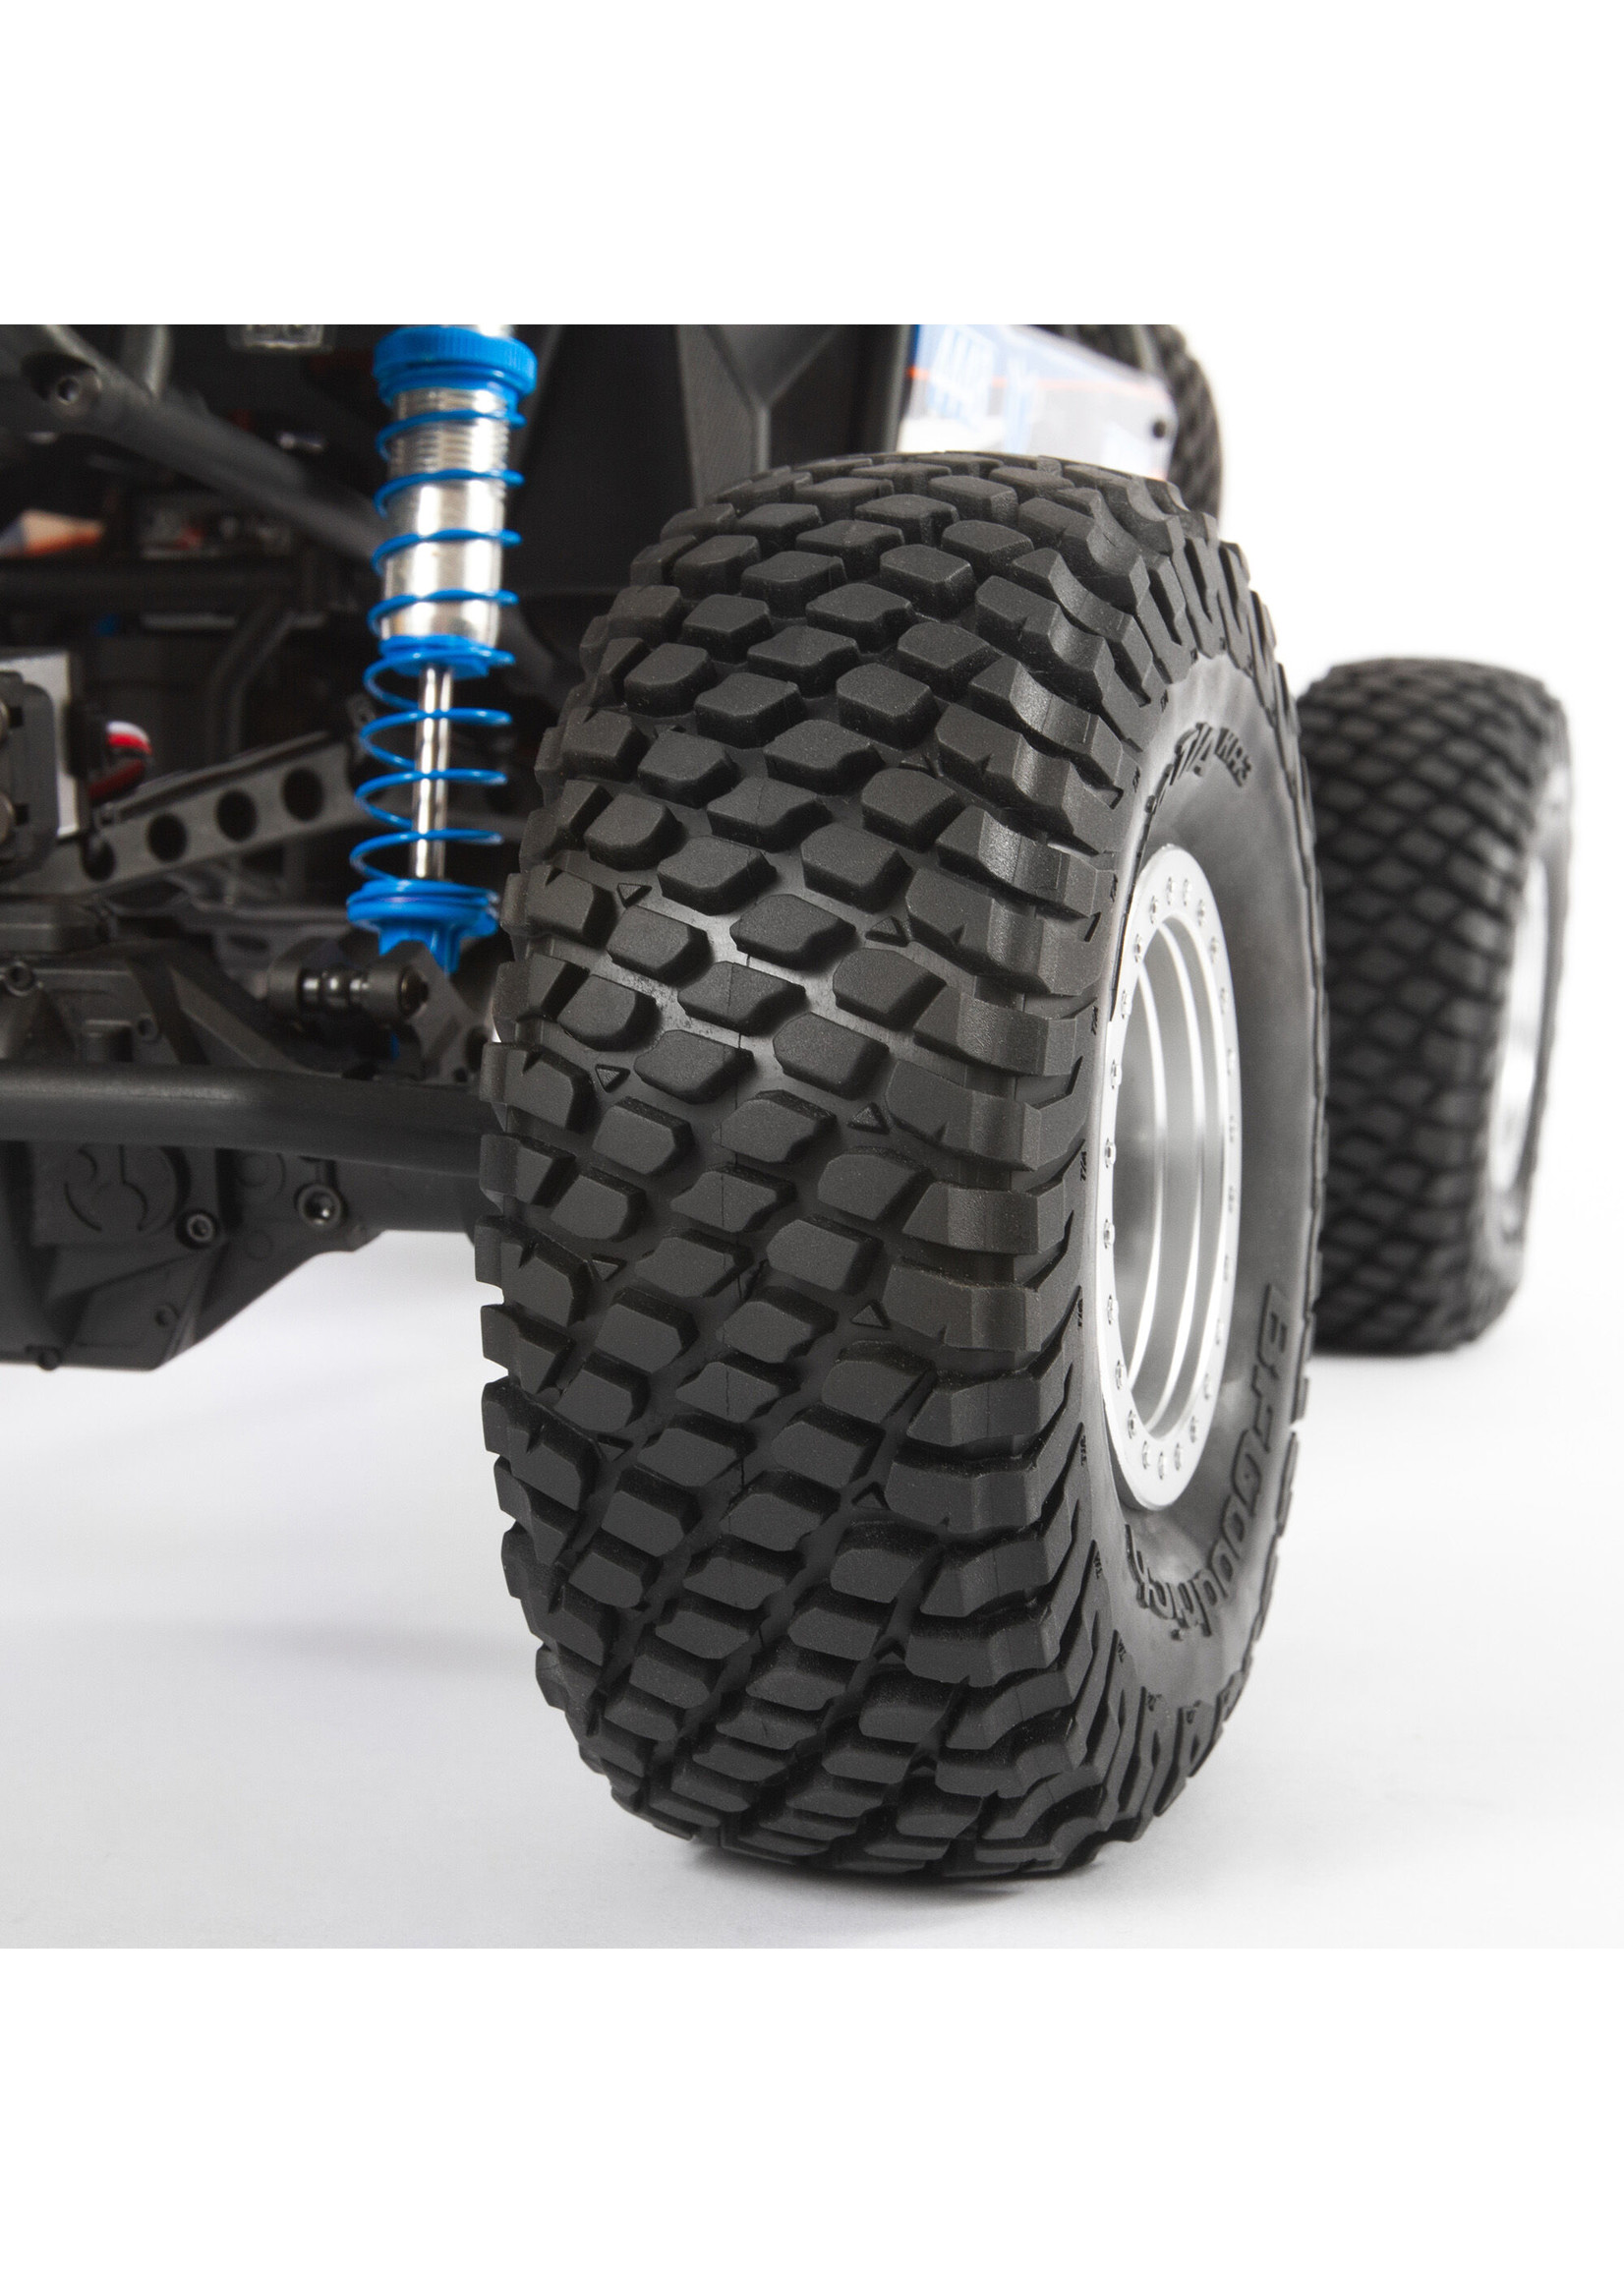 Axial 1/10 RR10 Bomber 4WD Rock Racer RTR - Blue